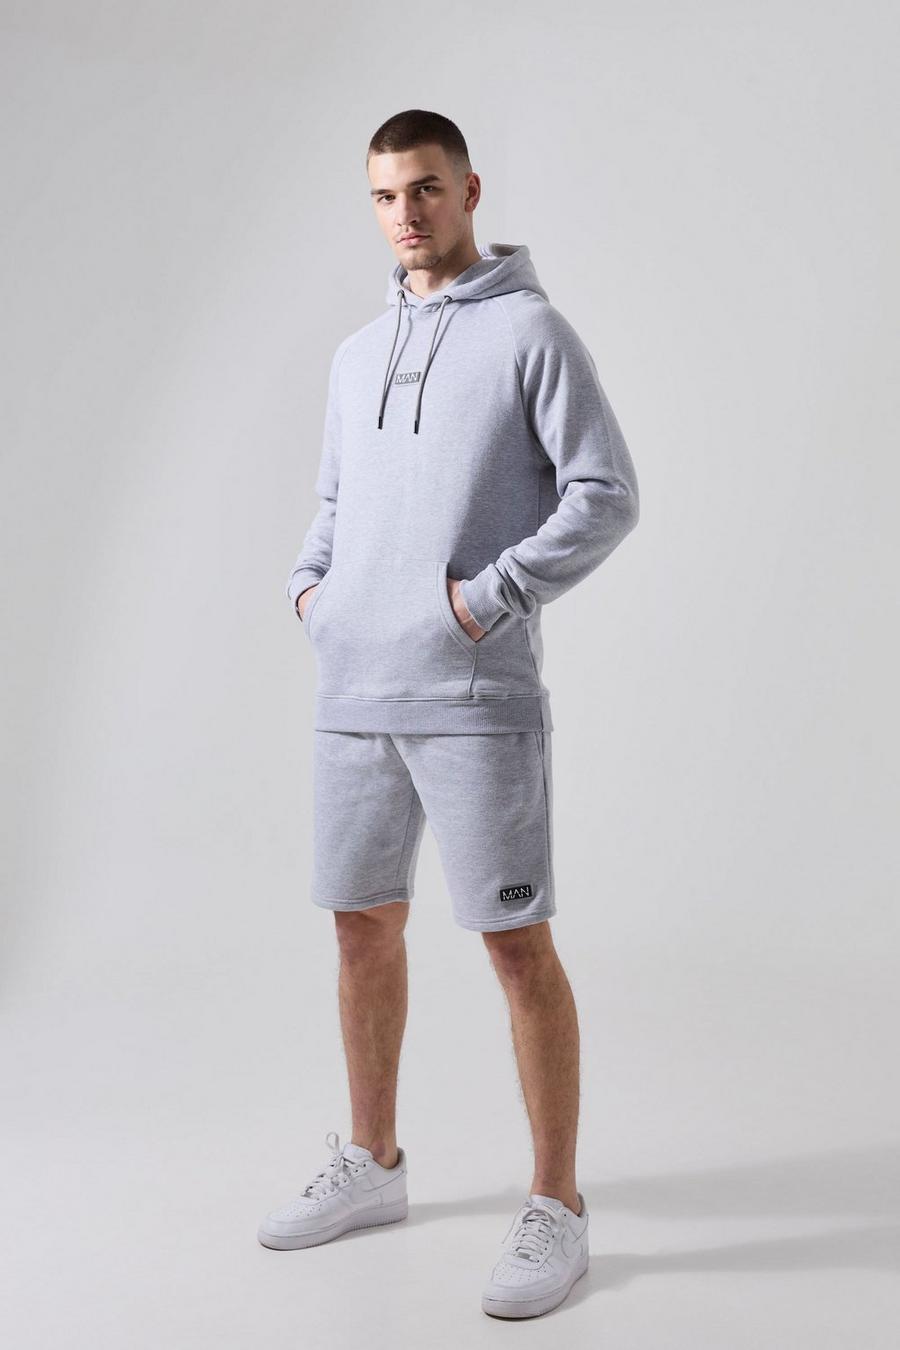 Tall Man Active Trainingshoodie und Shorts, Grey image number 1